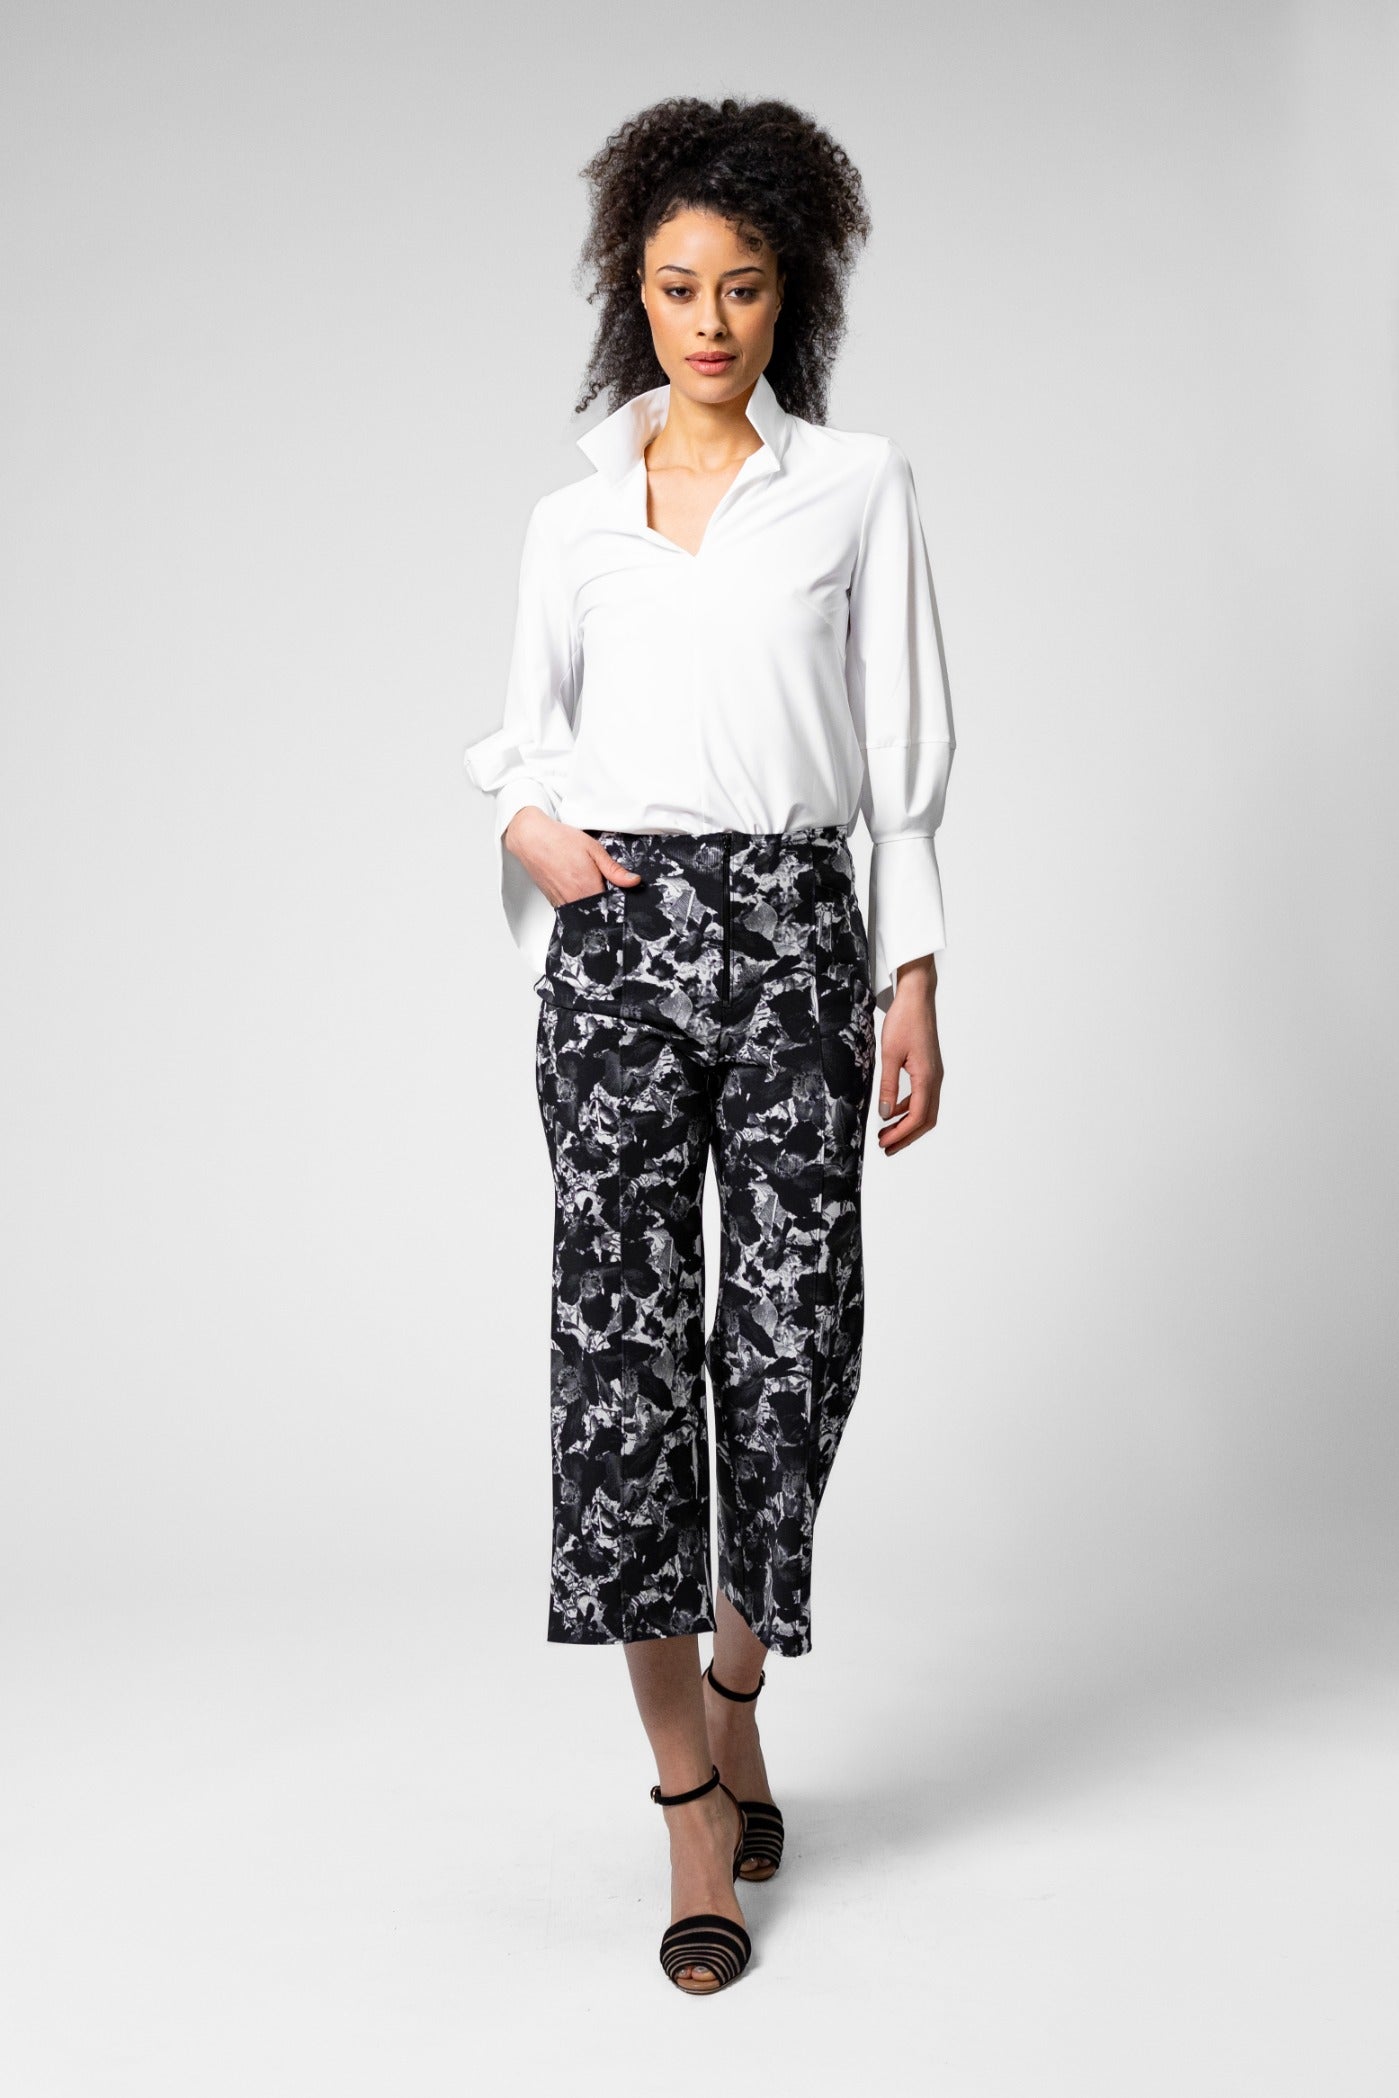 Stanwyk Pant - Deauville Print